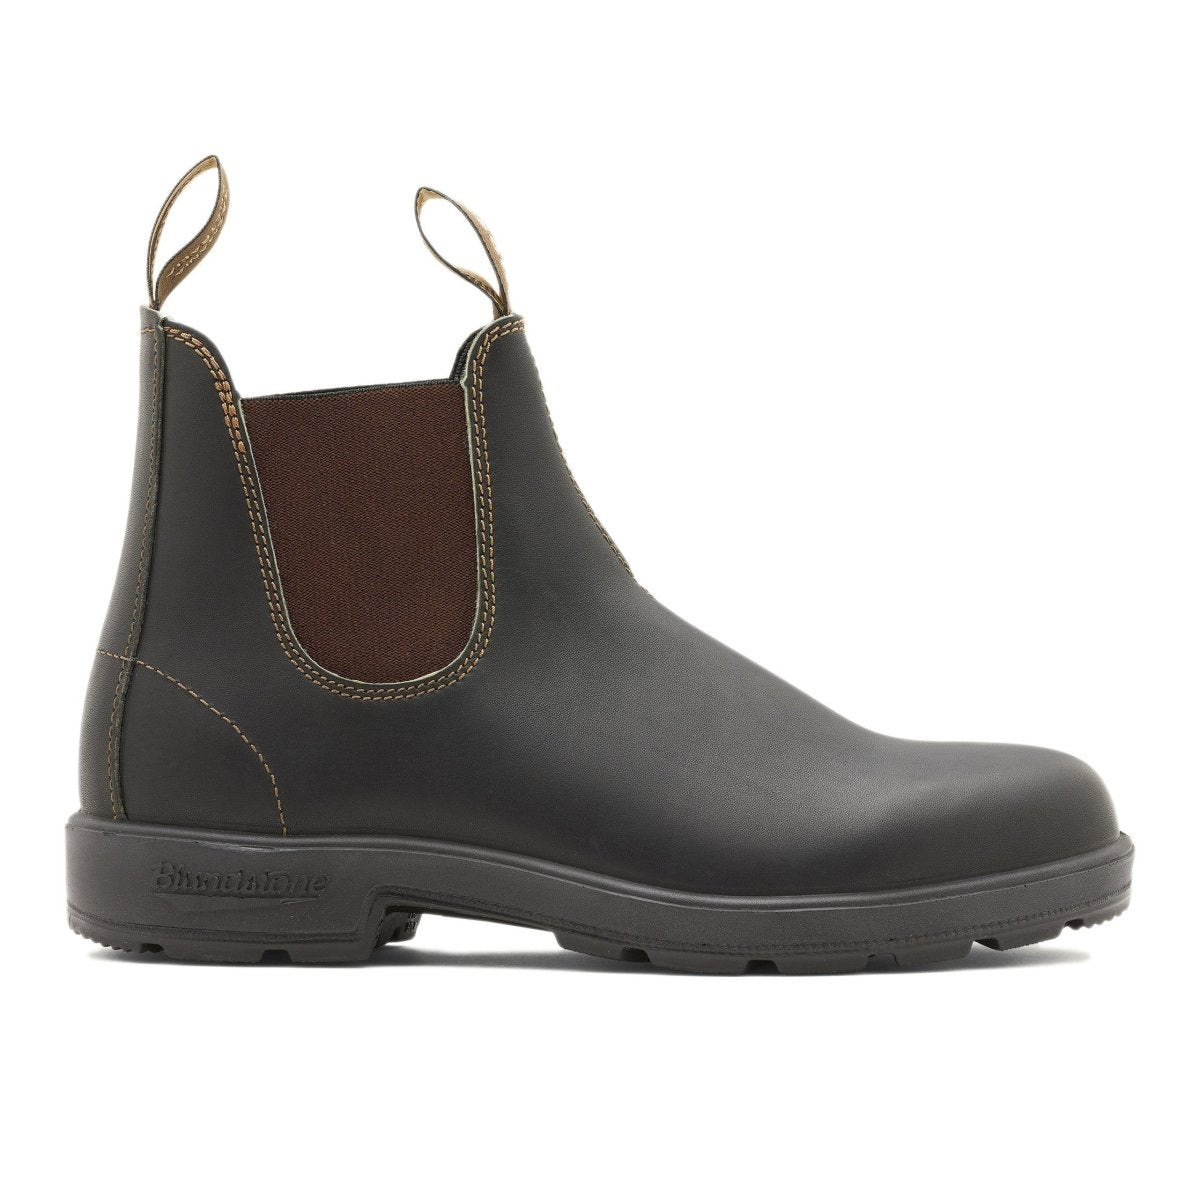 BLUNDSTONE UNISEX 500 BROWN LEATHER - 434042 - West NYC